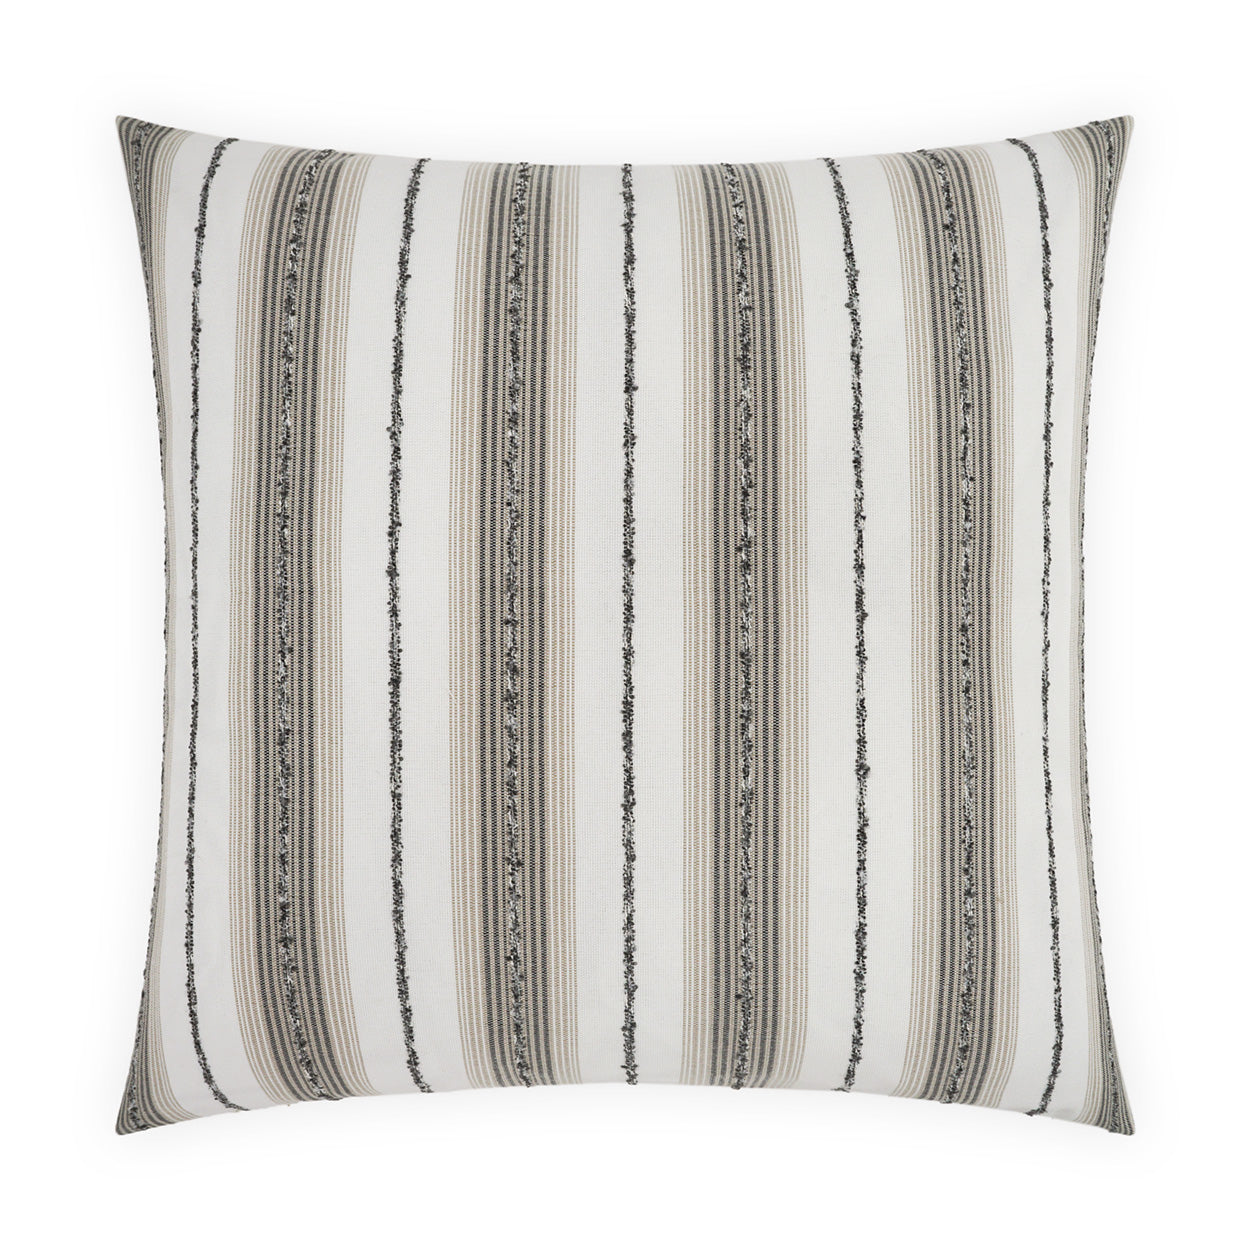 Outdoor Sunkist Pillow - Taupe